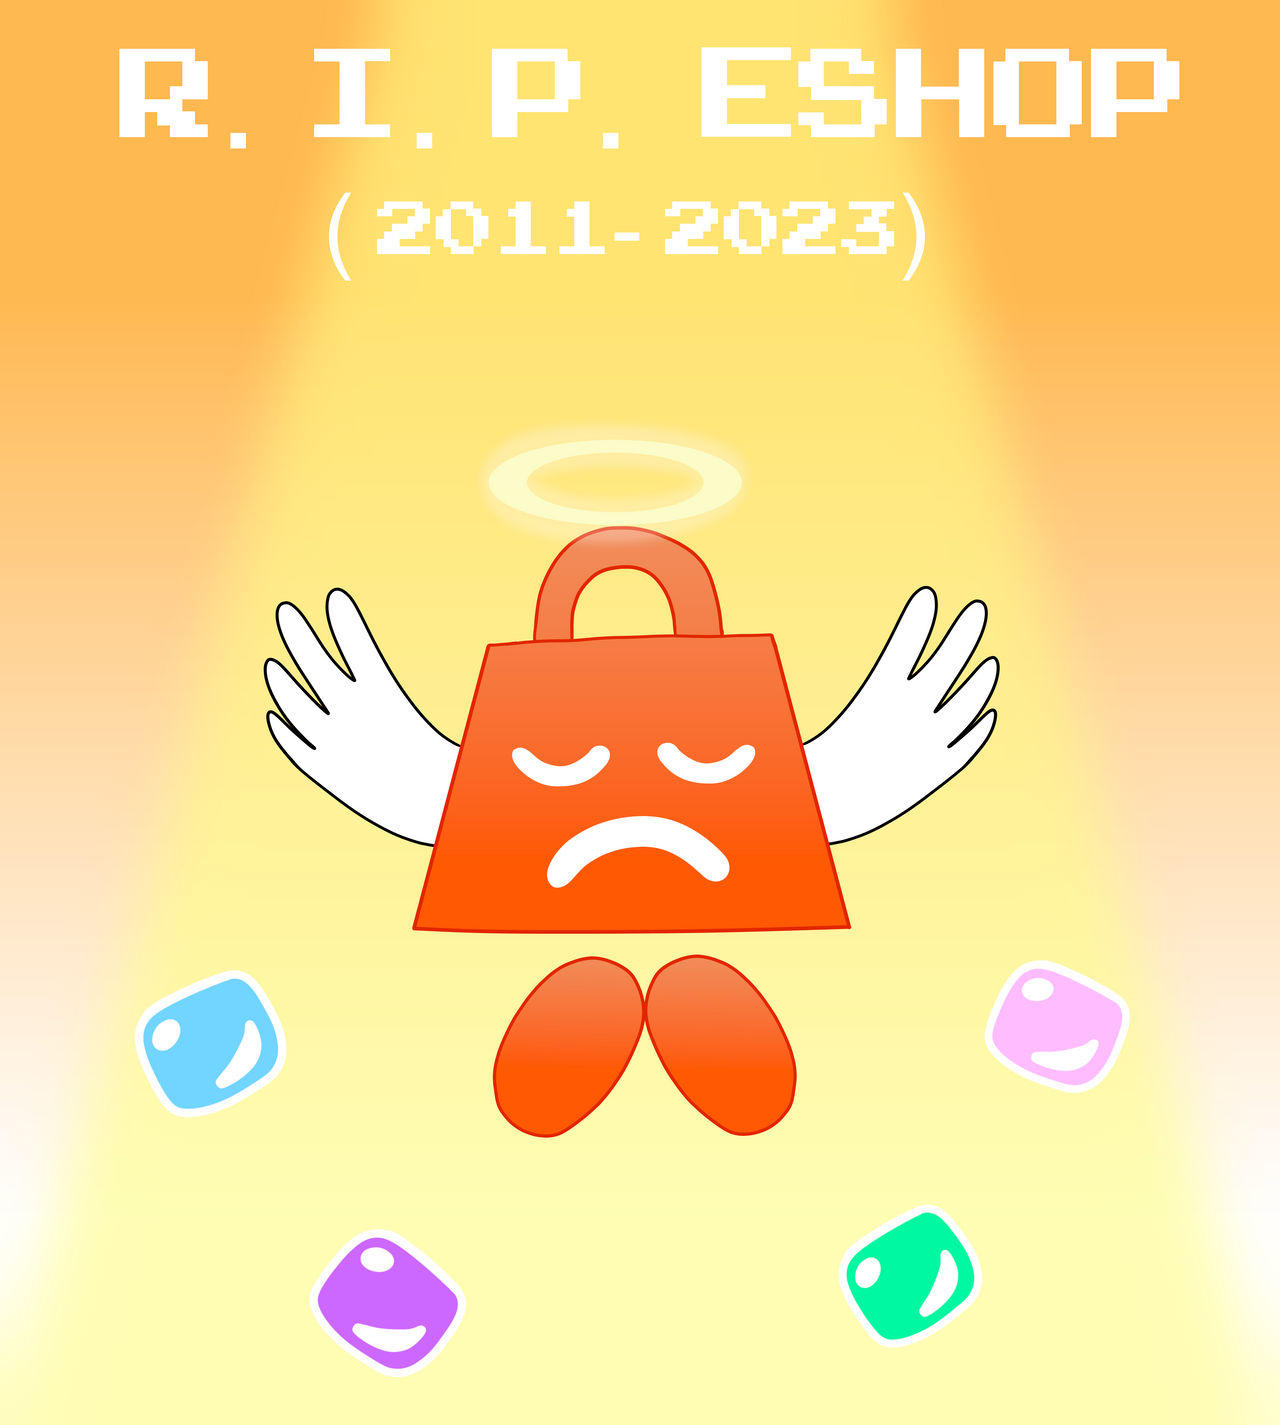 In memory of the 3DS and Wii U eShop by rabbidlover01 on DeviantArt